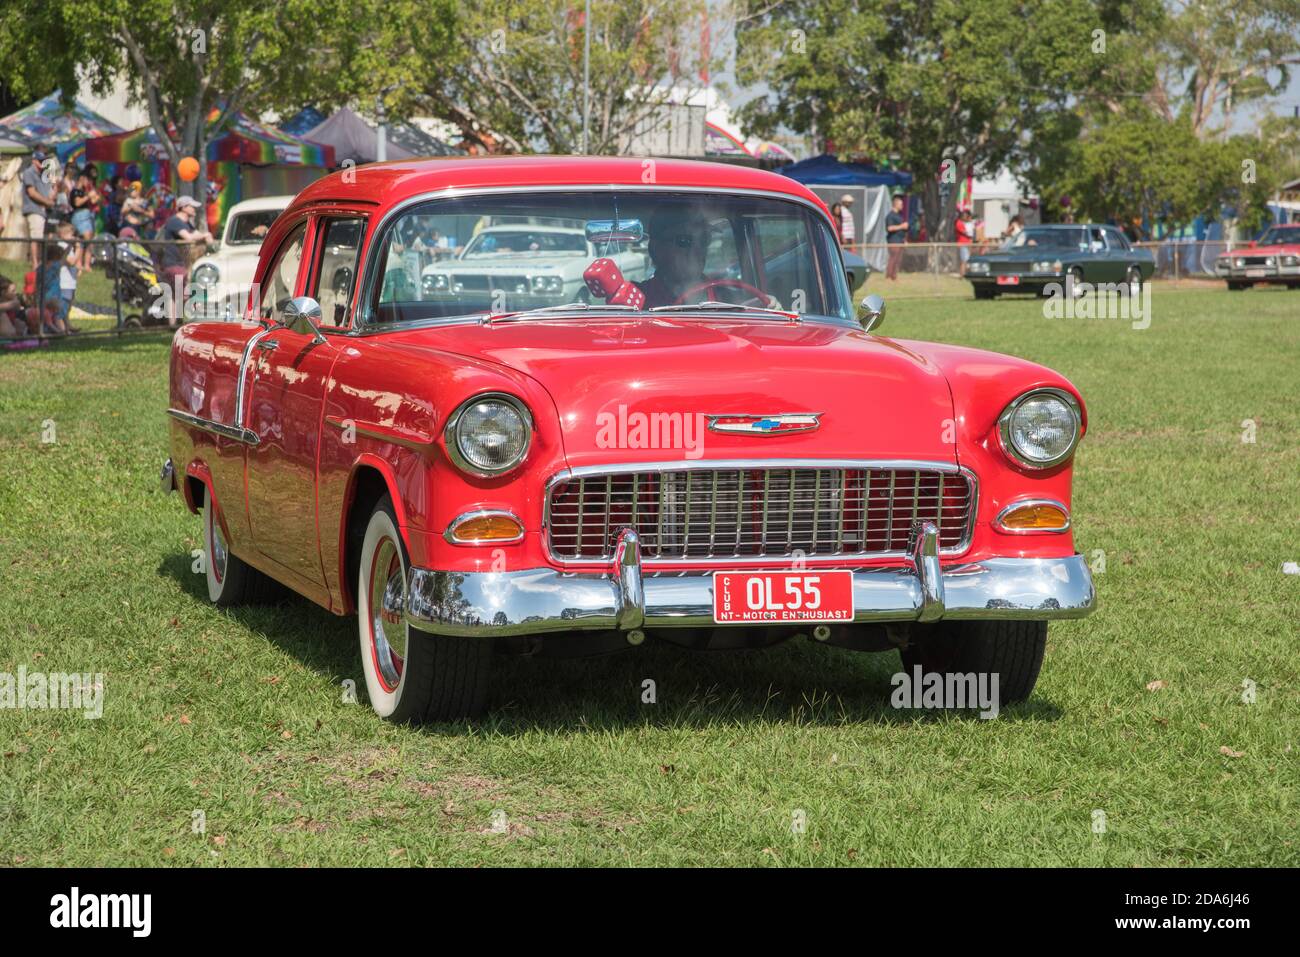 Darwin, NT, Australia-July 27,2018: Vintage red Chevy Bel-air with fuzzy dice and people at parade at the Darwin Show in the NT of Australia Stock Photo